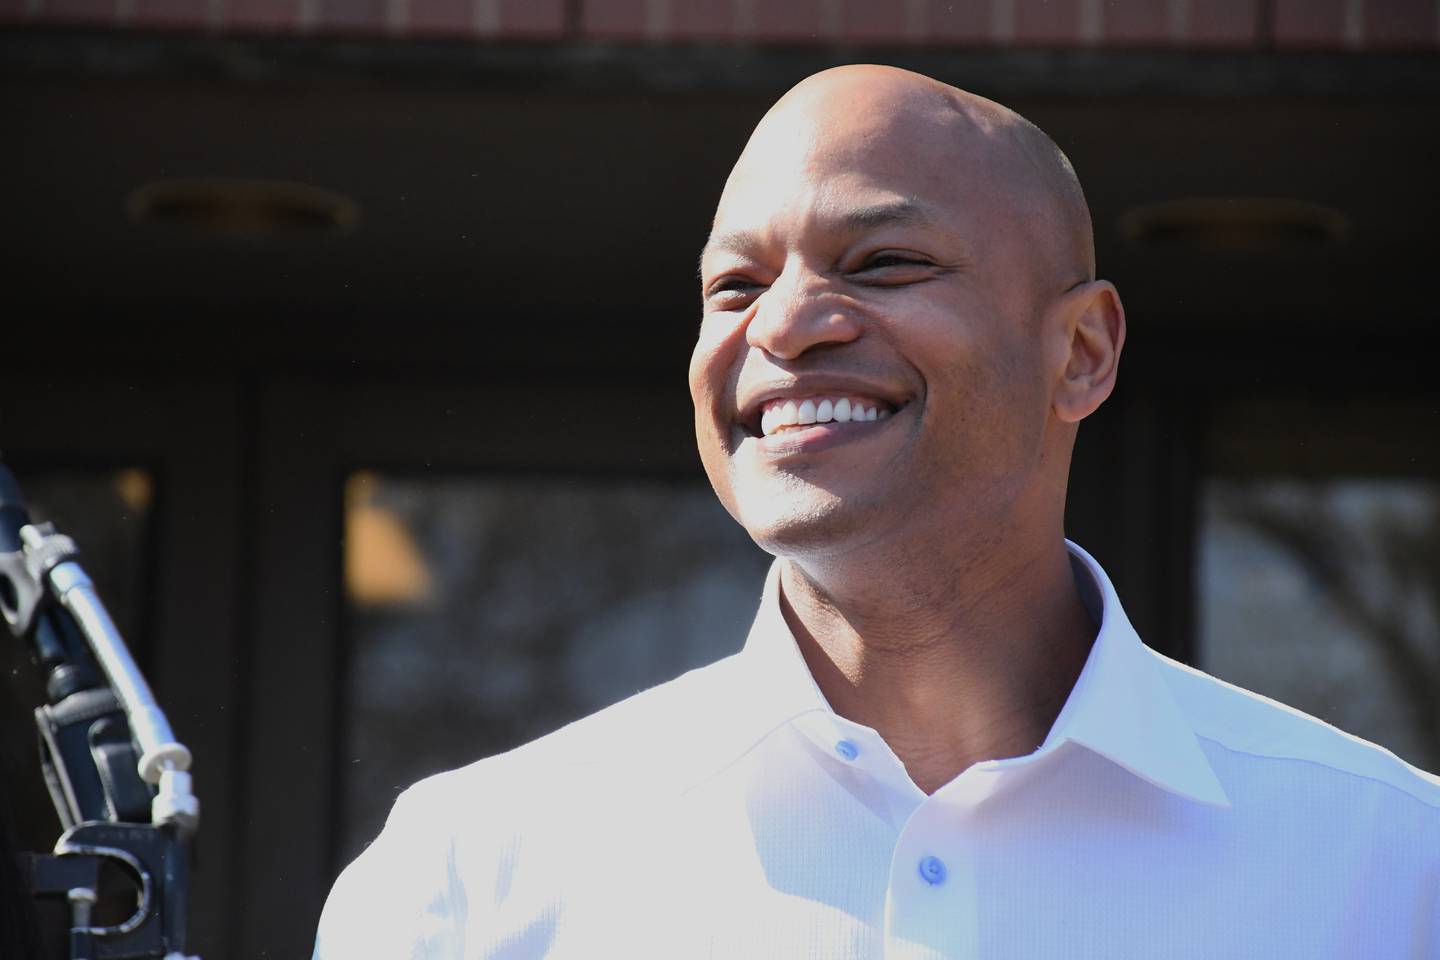 Democratic candidate for governor Wes Moore, who lives in Baltimore, speaks during a campaign event in Upper Marlboro on March 5, 2022.